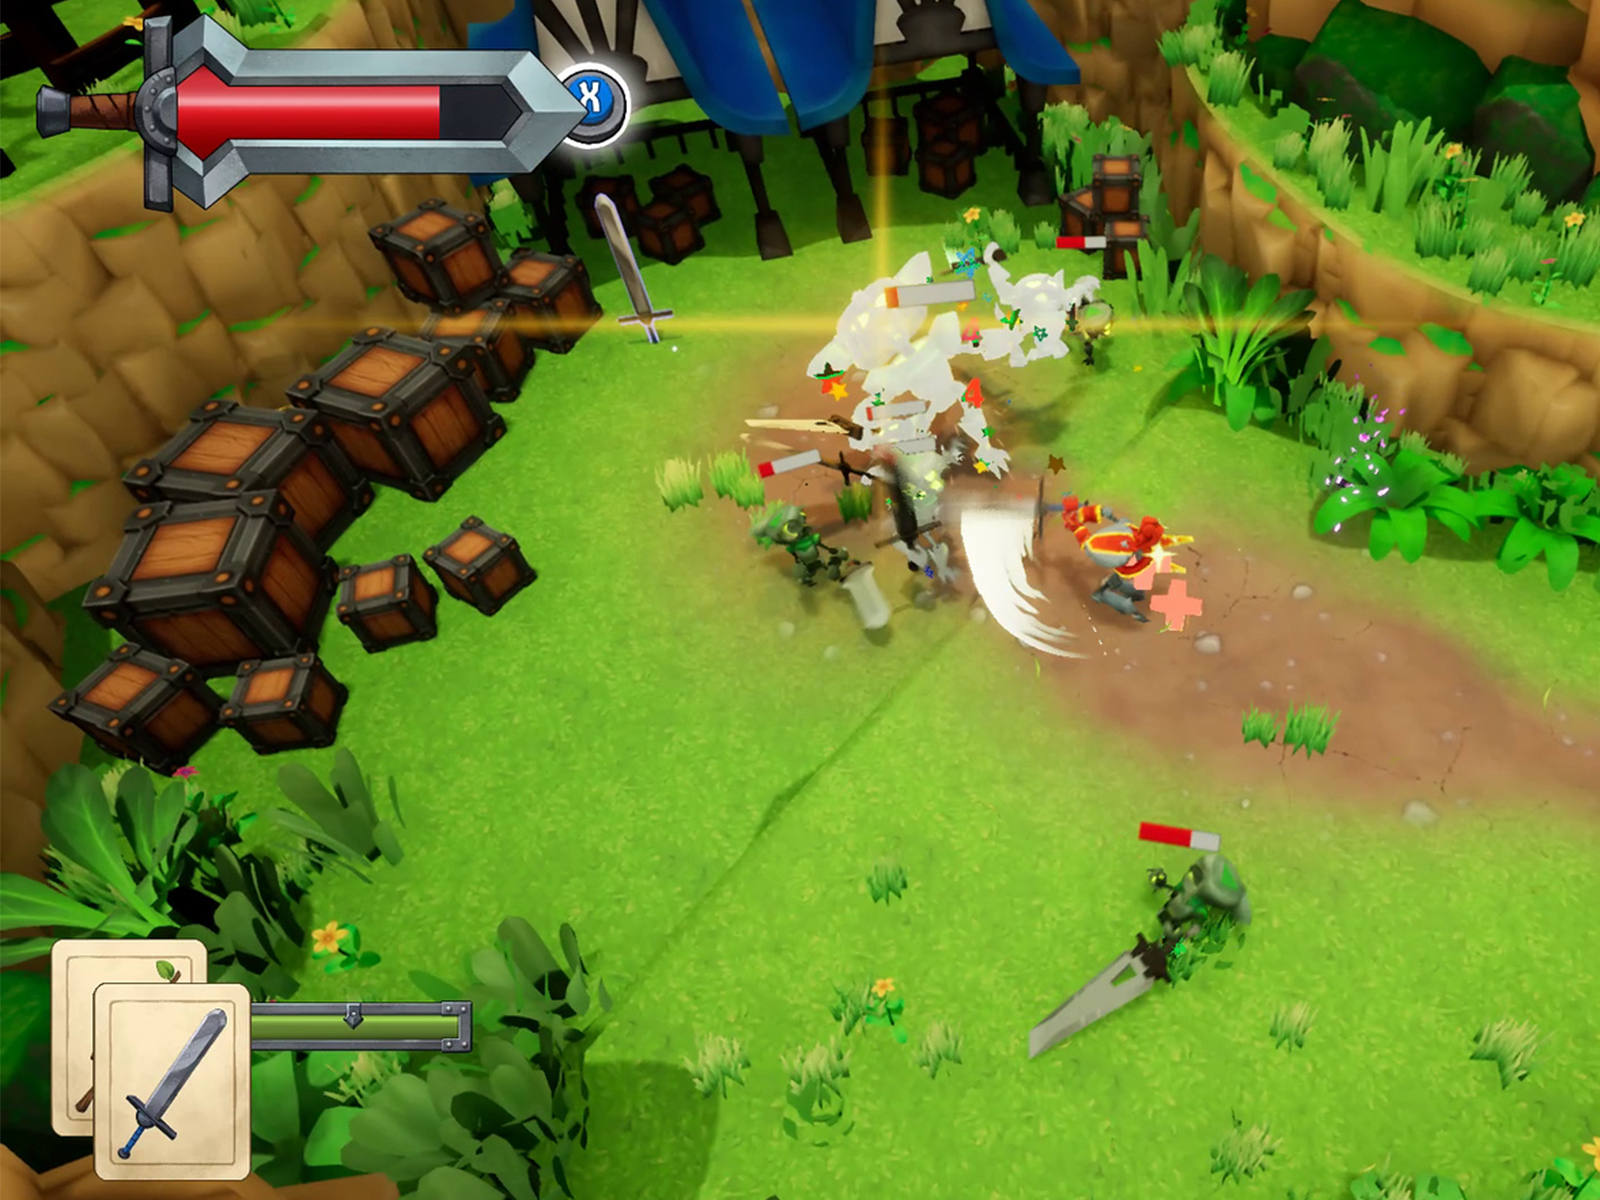 A knight swipes at enemies in DigiPen student game Excalibots